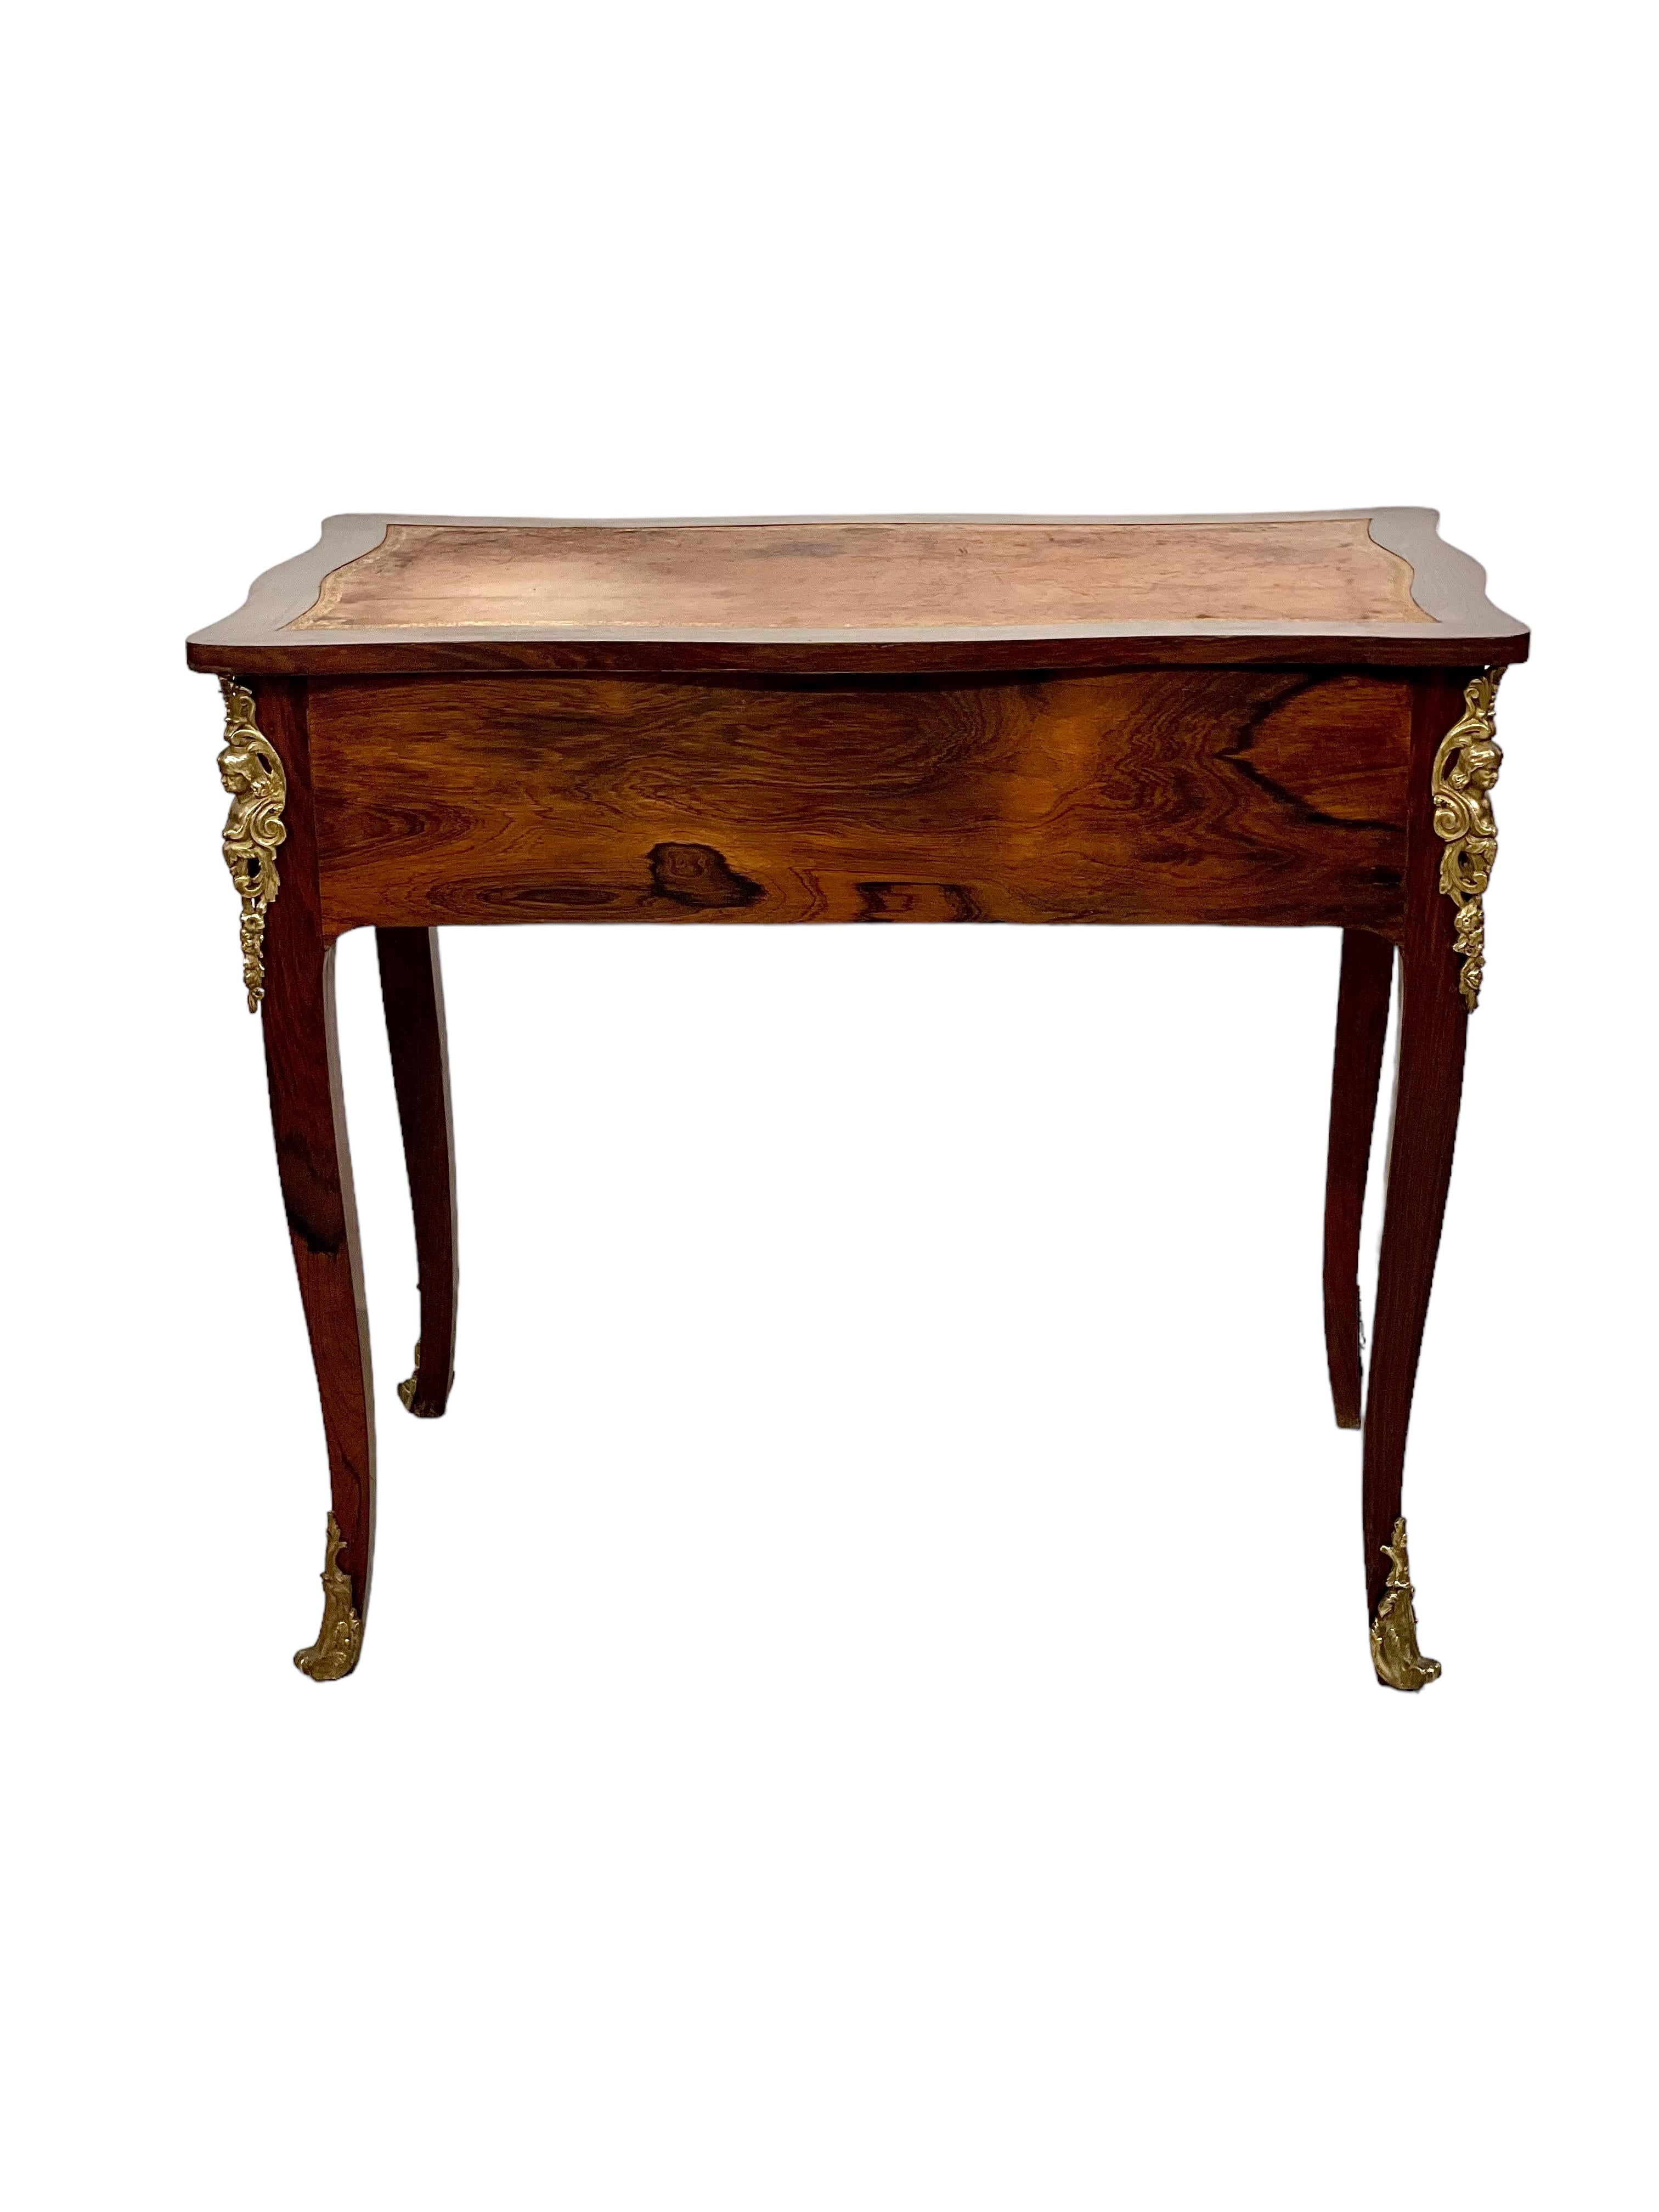 French 1750s Gilt Bronze Mounted Writing Lady Desk, by Adrien DELORME For Sale